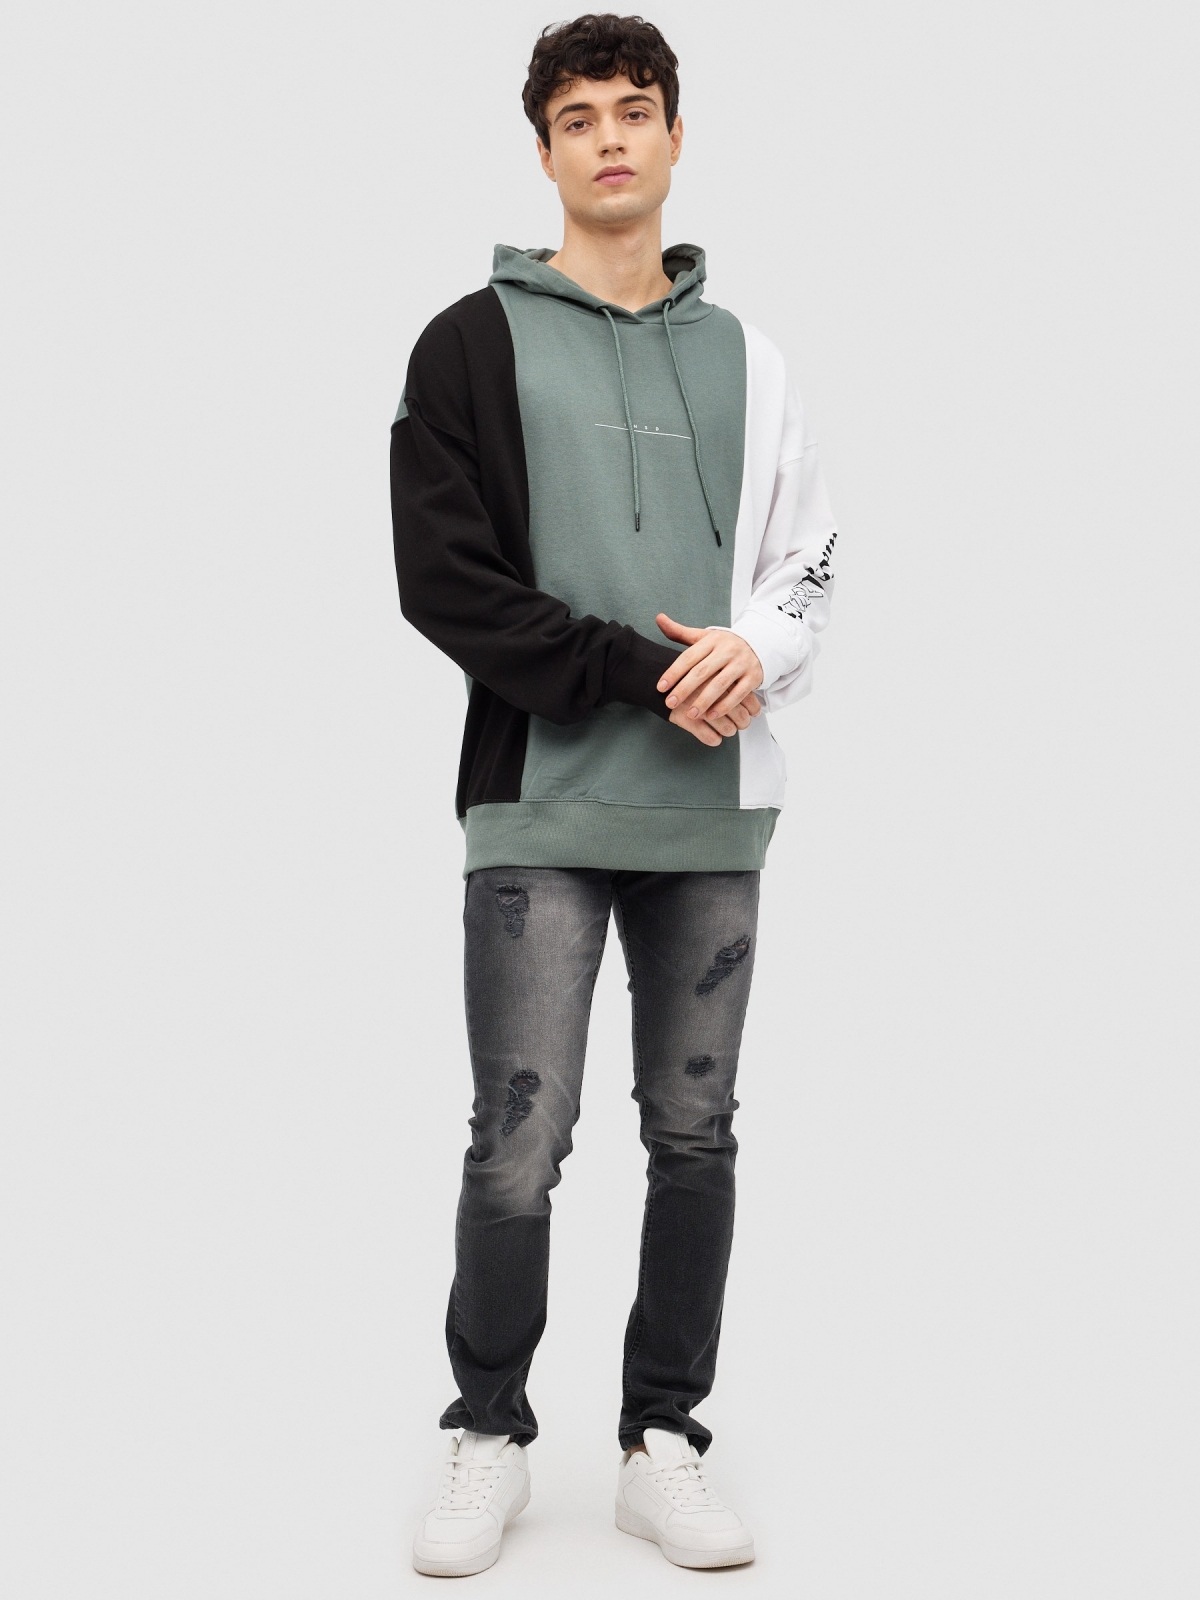 Tricolor sweatshirt with text greyish green front view